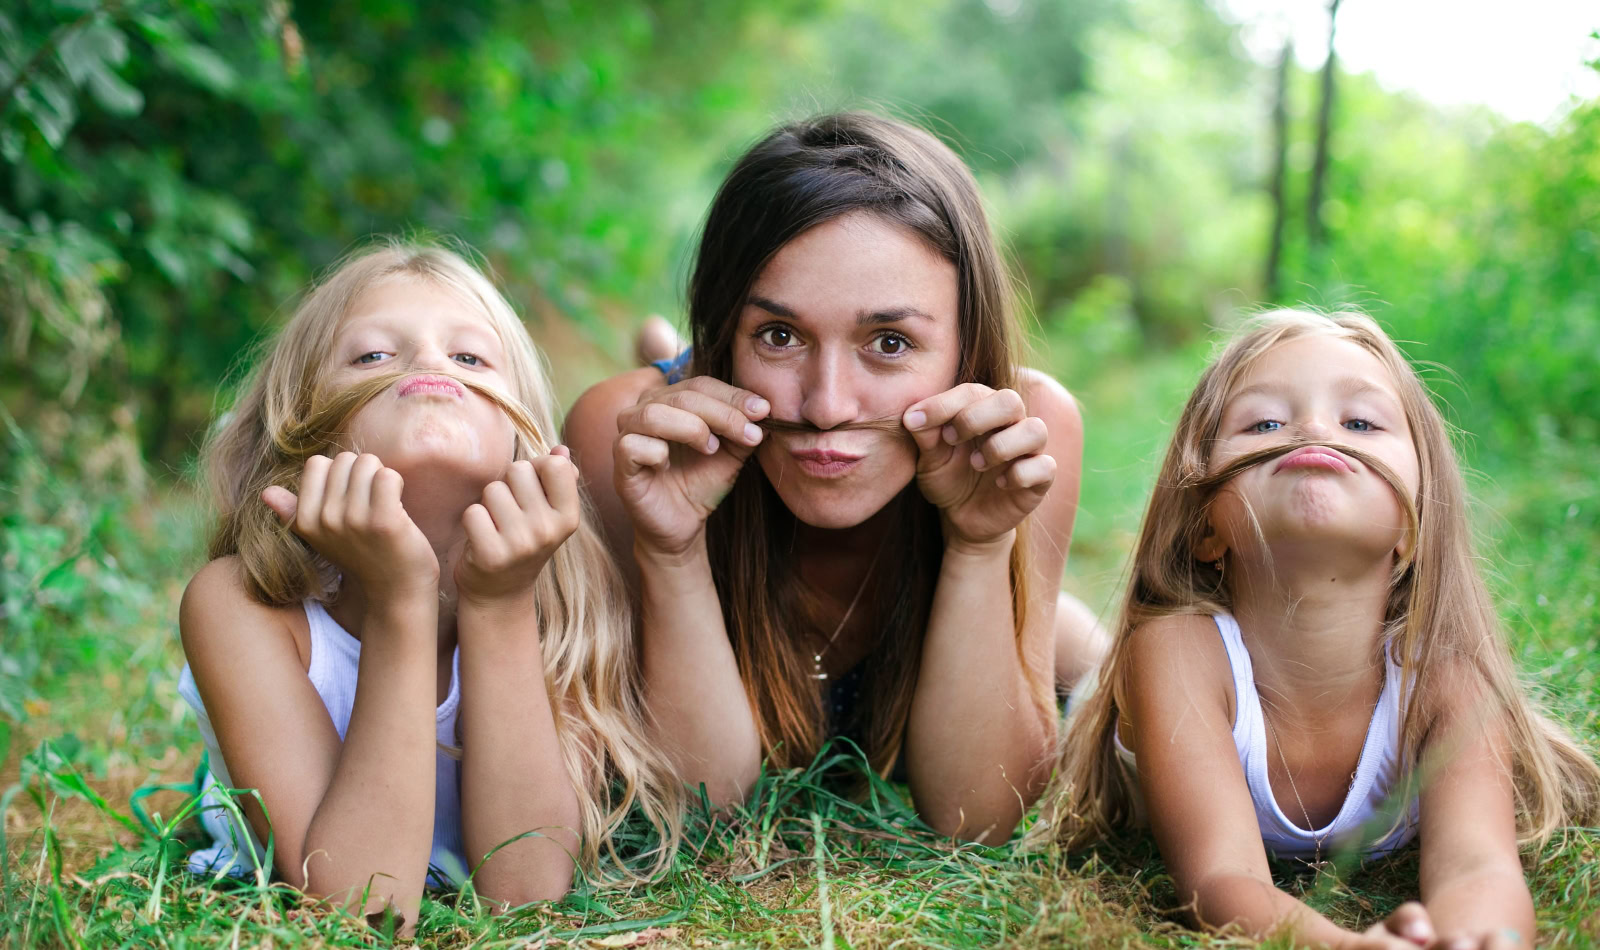 young woman and two girls acting goofy with their hair